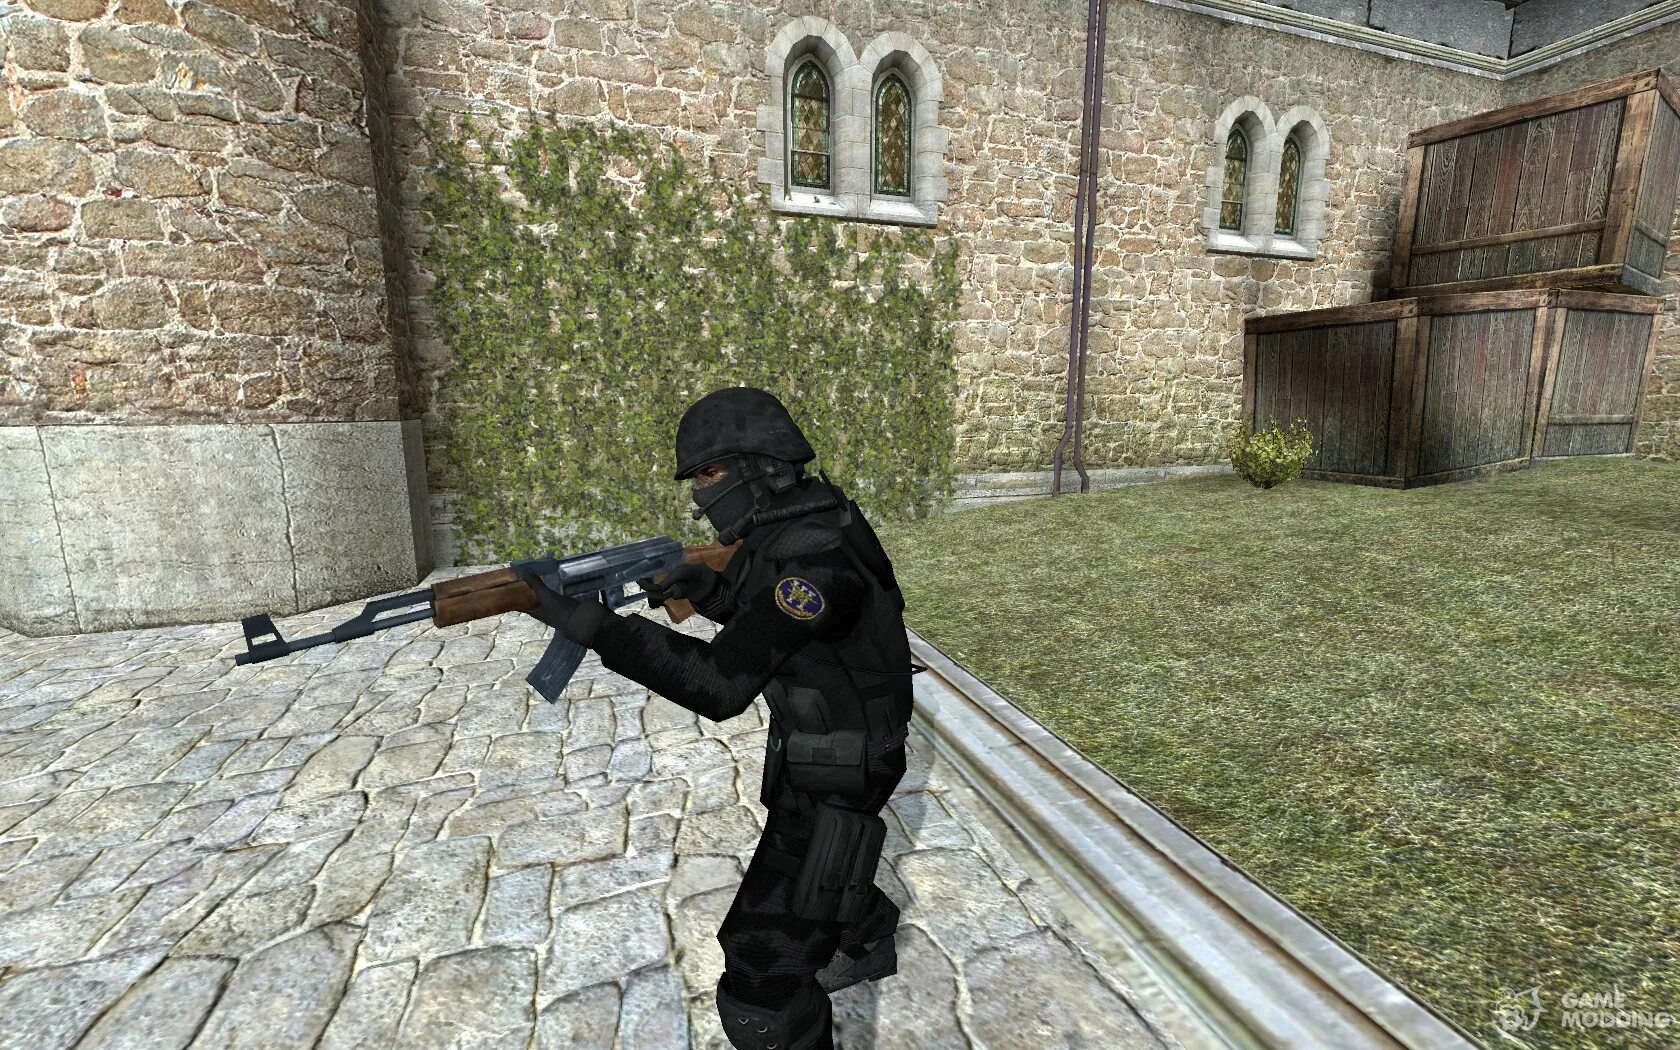 Counter strike source русский. Counter Strike русский спецназ 2. Counter Strike source спецназ. CS source русский спецназ. Спецназ контерстрайка.